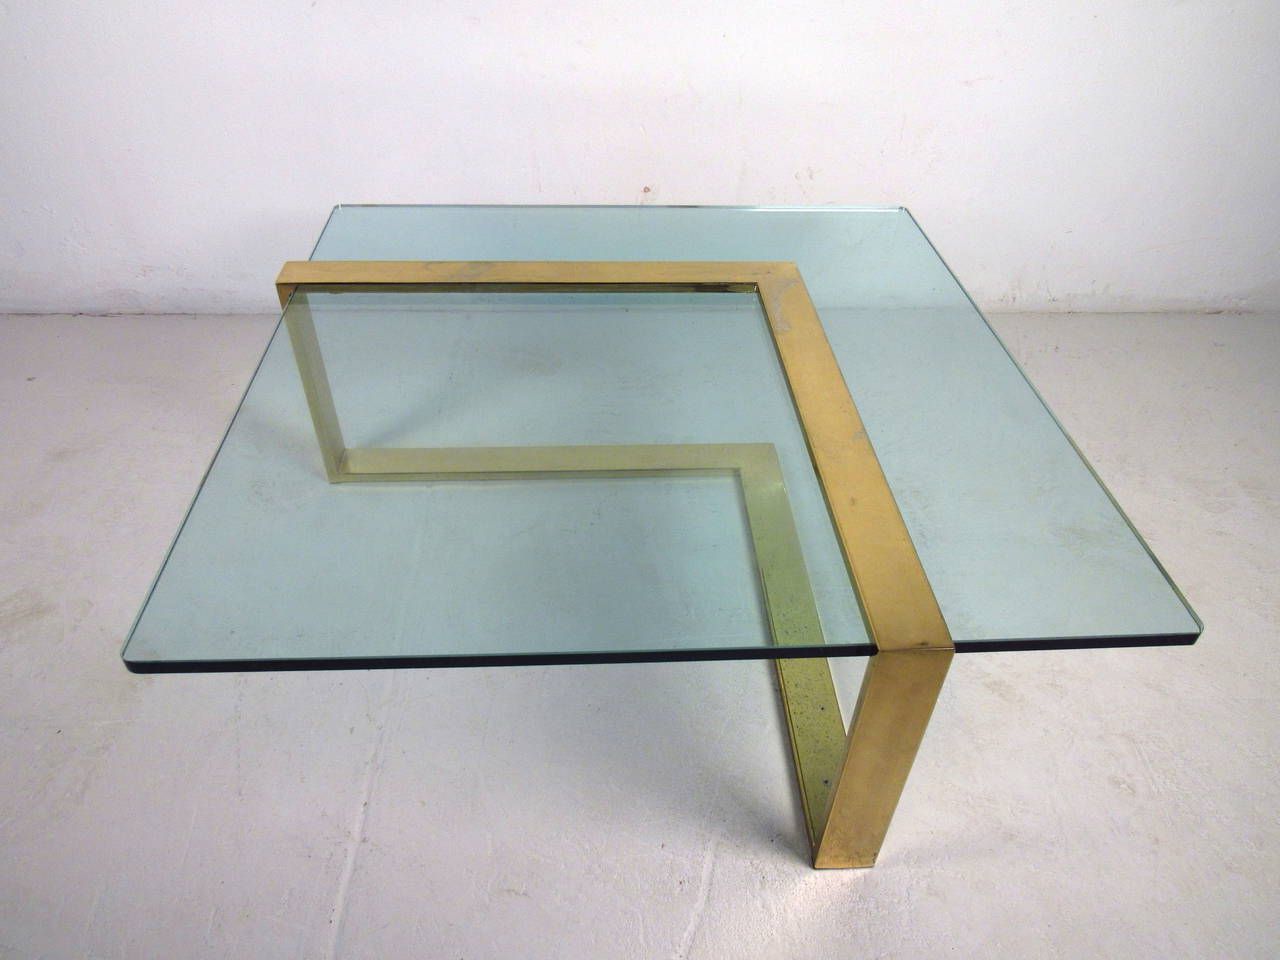 Famous L Shaped Coffee Tables In Brass L Shape Coffee Table With Glass Top At 1stdibs (View 6 of 20)